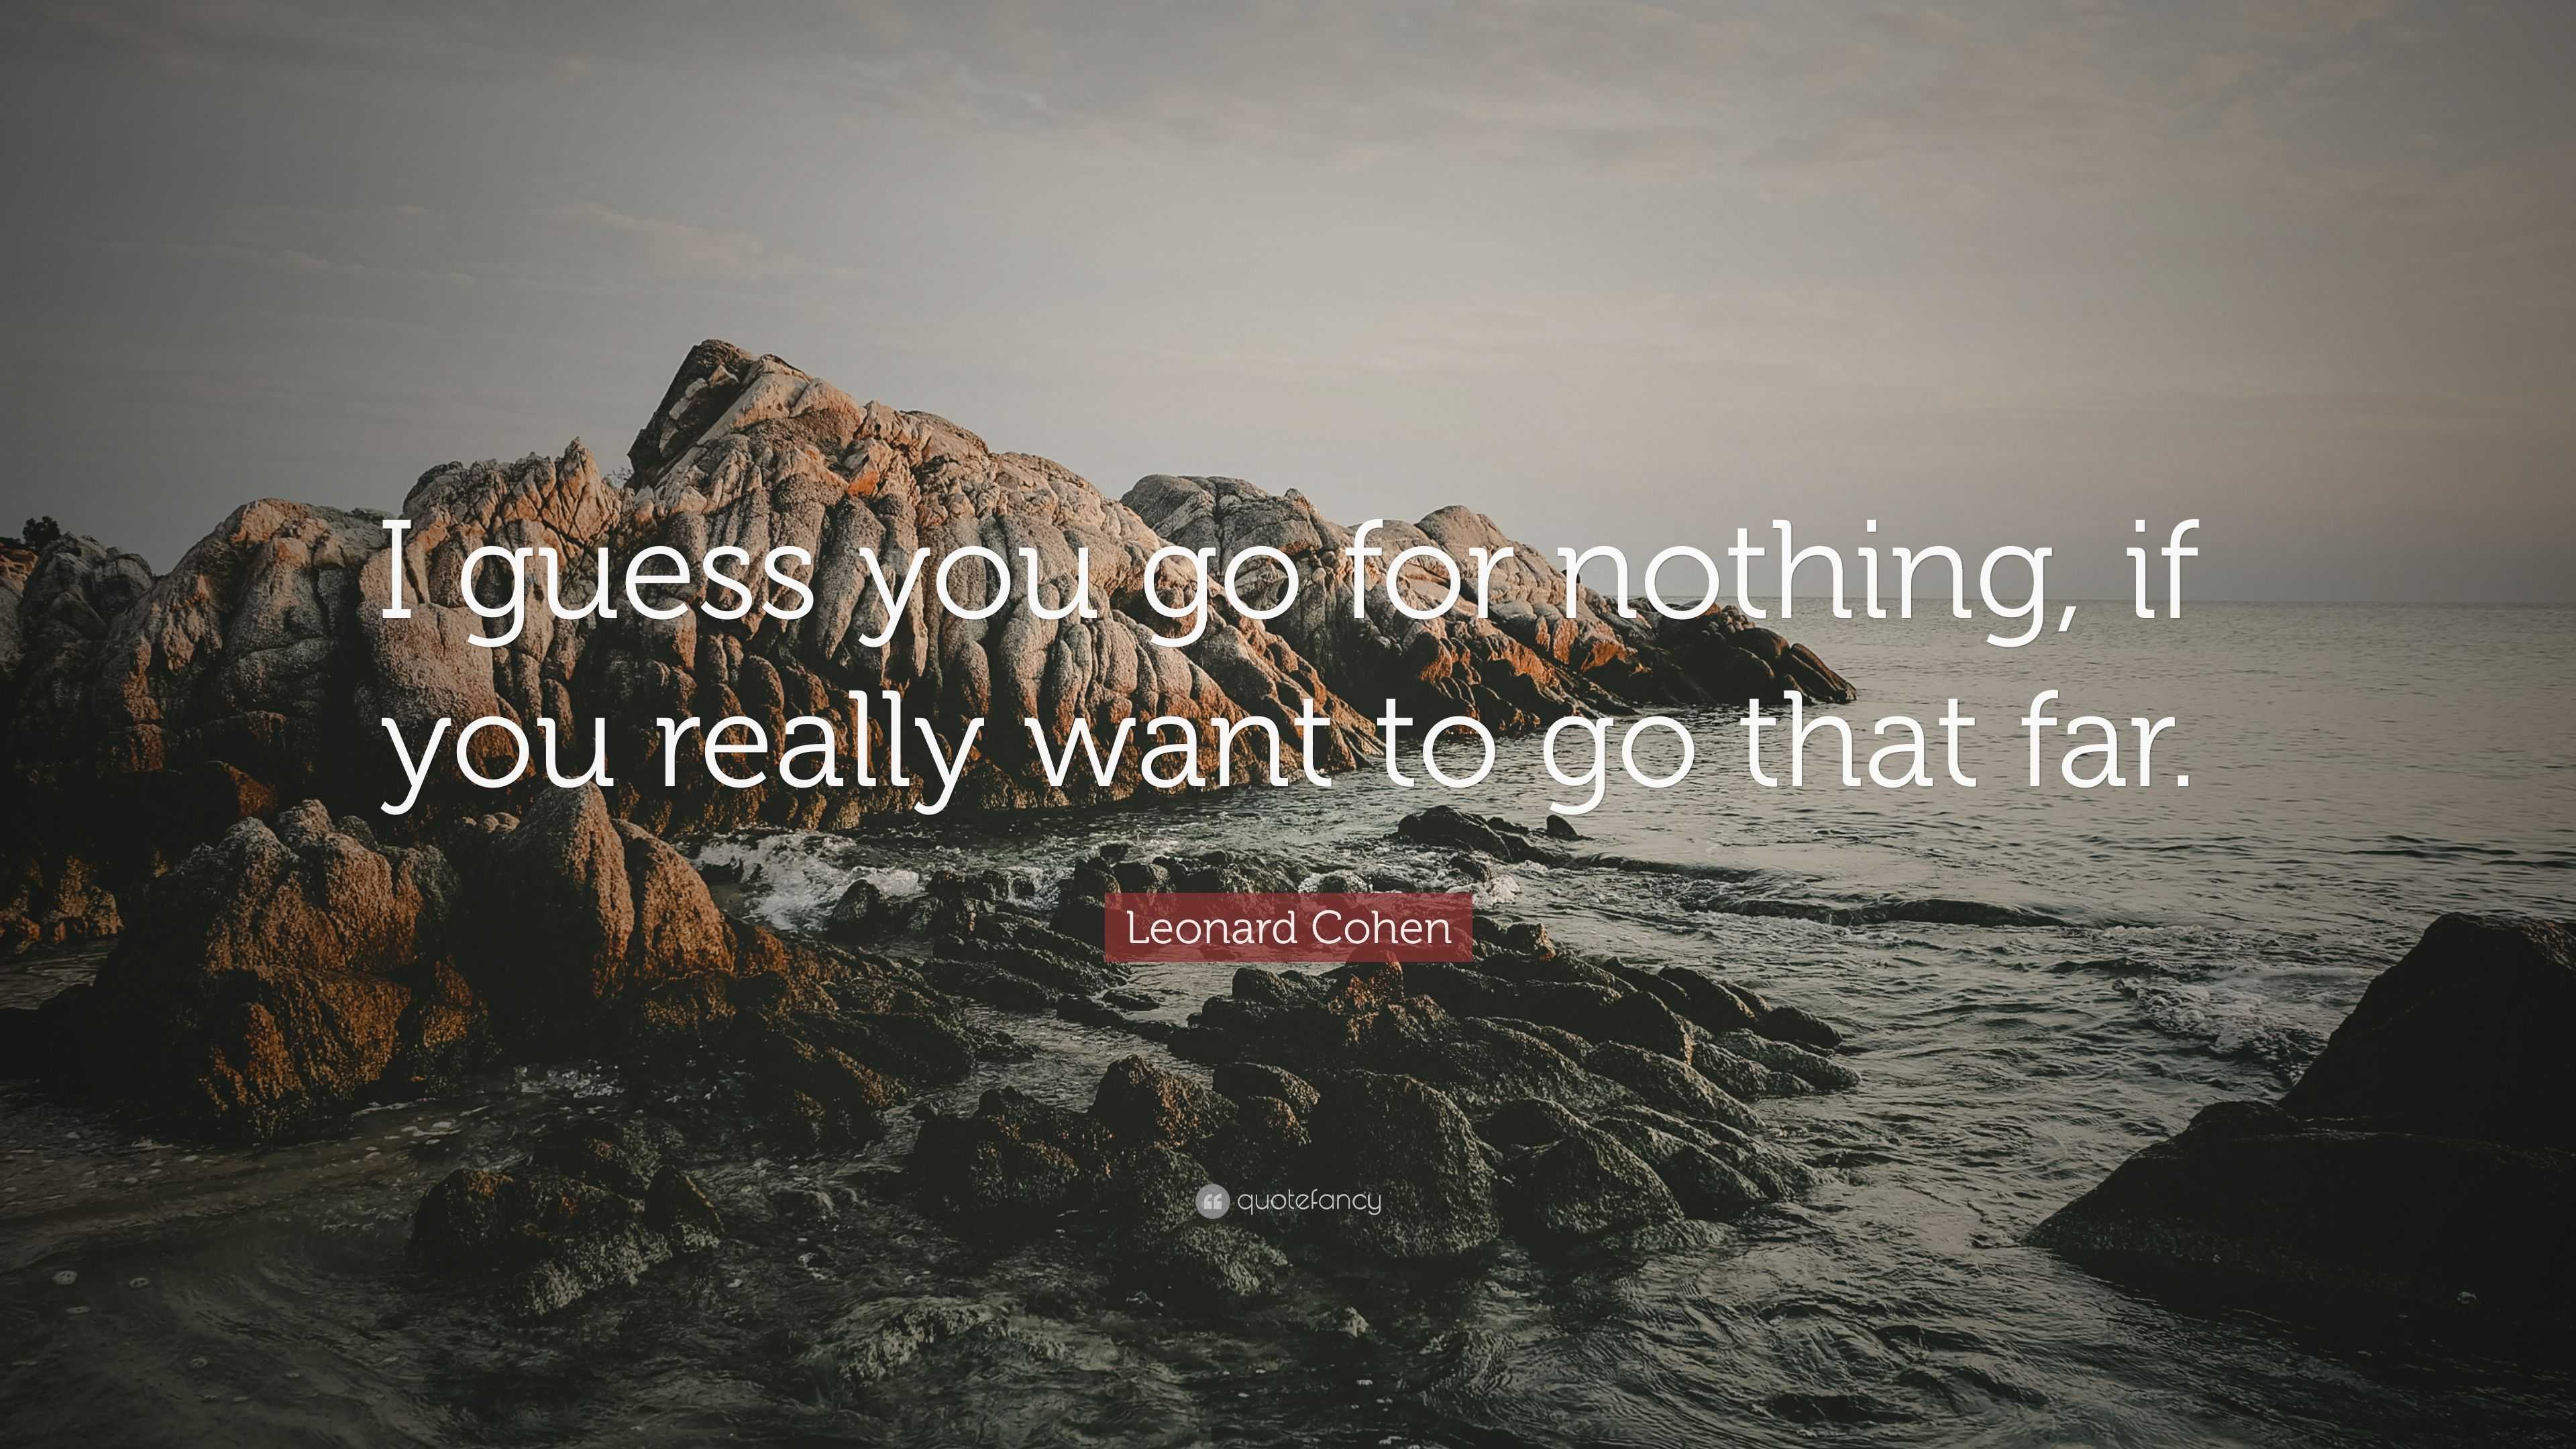 Leonard Cohen Quote: “I guess go for nothing, if you to go that